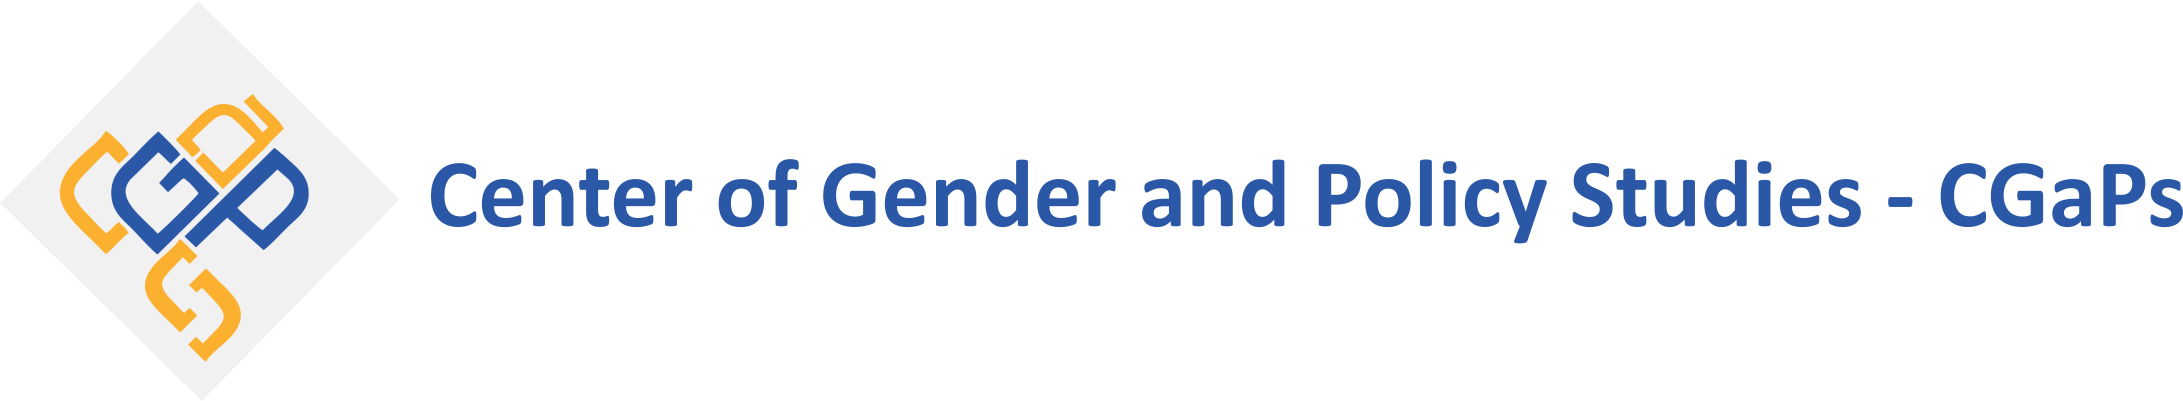 Center of Gender and Policy Studies - CGaPs